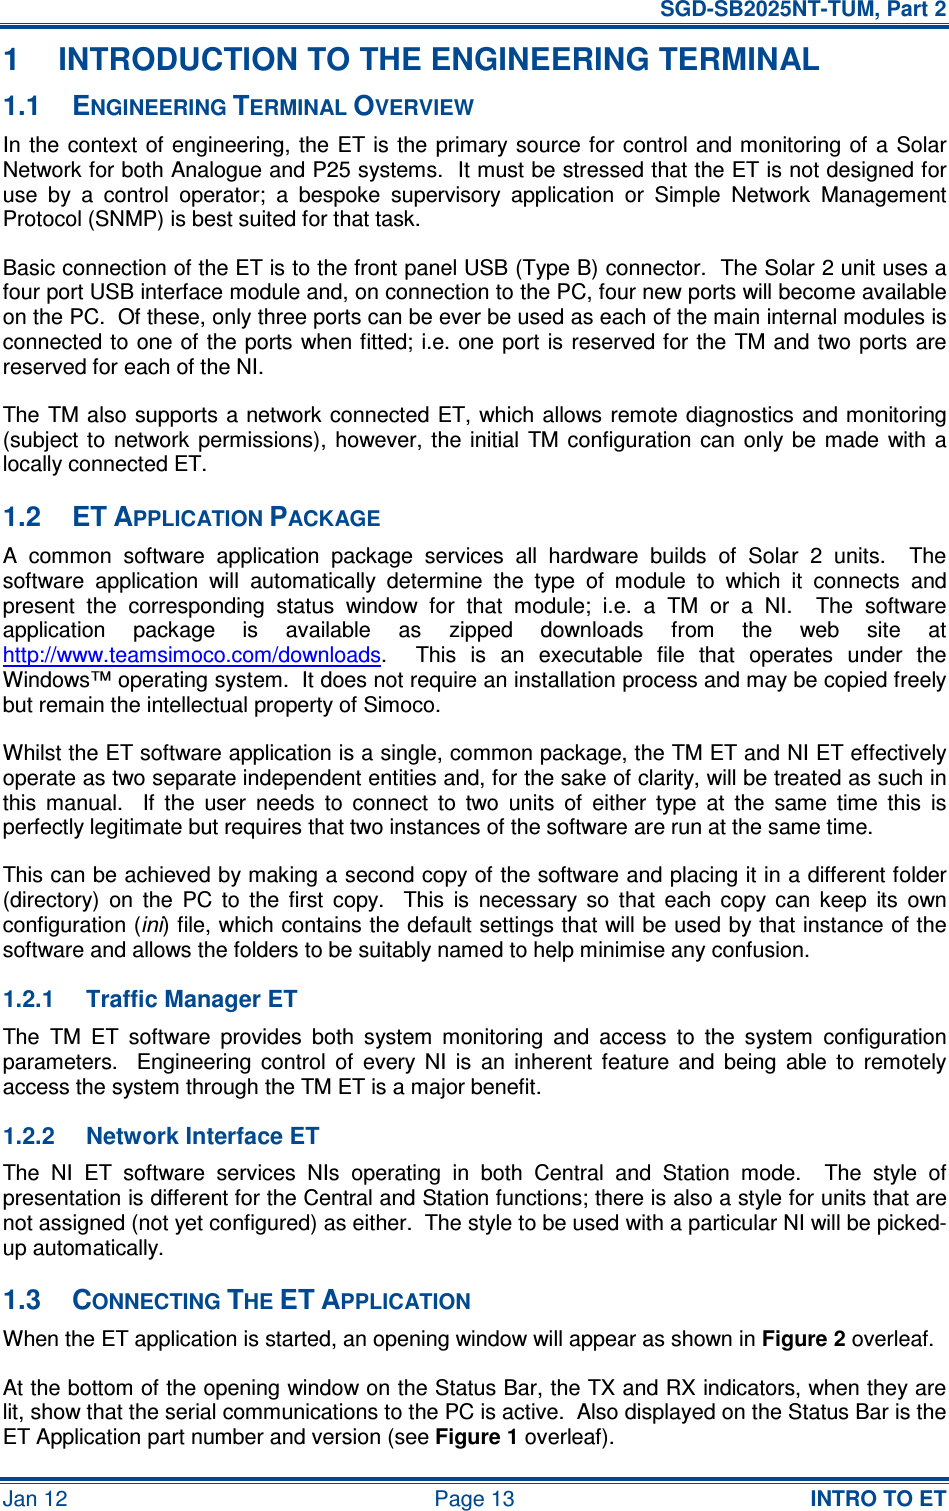   SGD-SB2025NT-TUM, Part 2 Jan 12  Page 13  INTRO TO ET 1  INTRODUCTION TO THE ENGINEERING TERMINAL 1.1  ENGINEERING TERMINAL OVERVIEW In the  context  of  engineering, the  ET is the  primary source for  control and monitoring of a Solar Network for both Analogue and P25 systems.  It must be stressed that the ET is not designed for use  by  a  control  operator;  a  bespoke  supervisory  application  or  Simple  Network  Management Protocol (SNMP) is best suited for that task. Basic connection of the ET is to the front panel USB (Type B) connector.  The Solar 2 unit uses a four port USB interface module and, on connection to the PC, four new ports will become available on the PC.  Of these, only three ports can be ever be used as each of the main internal modules is connected to  one of  the ports when fitted; i.e. one port  is reserved for the TM and two ports are reserved for each of the NI. The TM also supports a network connected ET, which allows remote diagnostics and monitoring (subject  to  network  permissions),  however,  the initial  TM configuration  can  only  be  made  with a locally connected ET. 1.2  ET APPLICATION PACKAGE A  common  software  application  package  services  all  hardware  builds  of  Solar  2  units.    The software  application  will  automatically  determine  the  type  of  module  to  which  it  connects  and present  the  corresponding  status  window  for  that  module;  i.e.  a  TM  or  a  NI.    The  software application  package  is  available  as  zipped  downloads  from  the  web  site  at http://www.teamsimoco.com/downloads.    This  is  an  executable  file  that  operates  under  the Windows™ operating system.  It does not require an installation process and may be copied freely but remain the intellectual property of Simoco. Whilst the ET software application is a single, common package, the TM ET and NI ET effectively operate as two separate independent entities and, for the sake of clarity, will be treated as such in this  manual.    If  the  user  needs  to  connect  to  two  units  of  either  type  at  the  same  time  this  is perfectly legitimate but requires that two instances of the software are run at the same time. This can be achieved by making a second copy of the software and placing it in a different folder (directory)  on  the  PC  to  the  first  copy.    This  is  necessary  so  that  each  copy  can  keep  its  own configuration (ini) file, which contains the default settings that will be used by that instance of the software and allows the folders to be suitably named to help minimise any confusion. 1.2.1  Traffic Manager ET The  TM  ET  software  provides  both  system  monitoring  and  access  to  the  system  configuration parameters.    Engineering  control  of  every  NI  is  an  inherent  feature  and  being  able  to  remotely access the system through the TM ET is a major benefit. 1.2.2  Network Interface ET The  NI  ET  software  services  NIs  operating  in  both  Central  and  Station  mode.    The  style  of presentation is different for the Central and Station functions; there is also a style for units that are not assigned (not yet configured) as either.  The style to be used with a particular NI will be picked-up automatically. 1.3  CONNECTING THE ET APPLICATION When the ET application is started, an opening window will appear as shown in Figure 2 overleaf. At the bottom of the opening window on the Status Bar, the TX and RX indicators, when they are lit, show that the serial communications to the PC is active.  Also displayed on the Status Bar is the ET Application part number and version (see Figure 1 overleaf). 